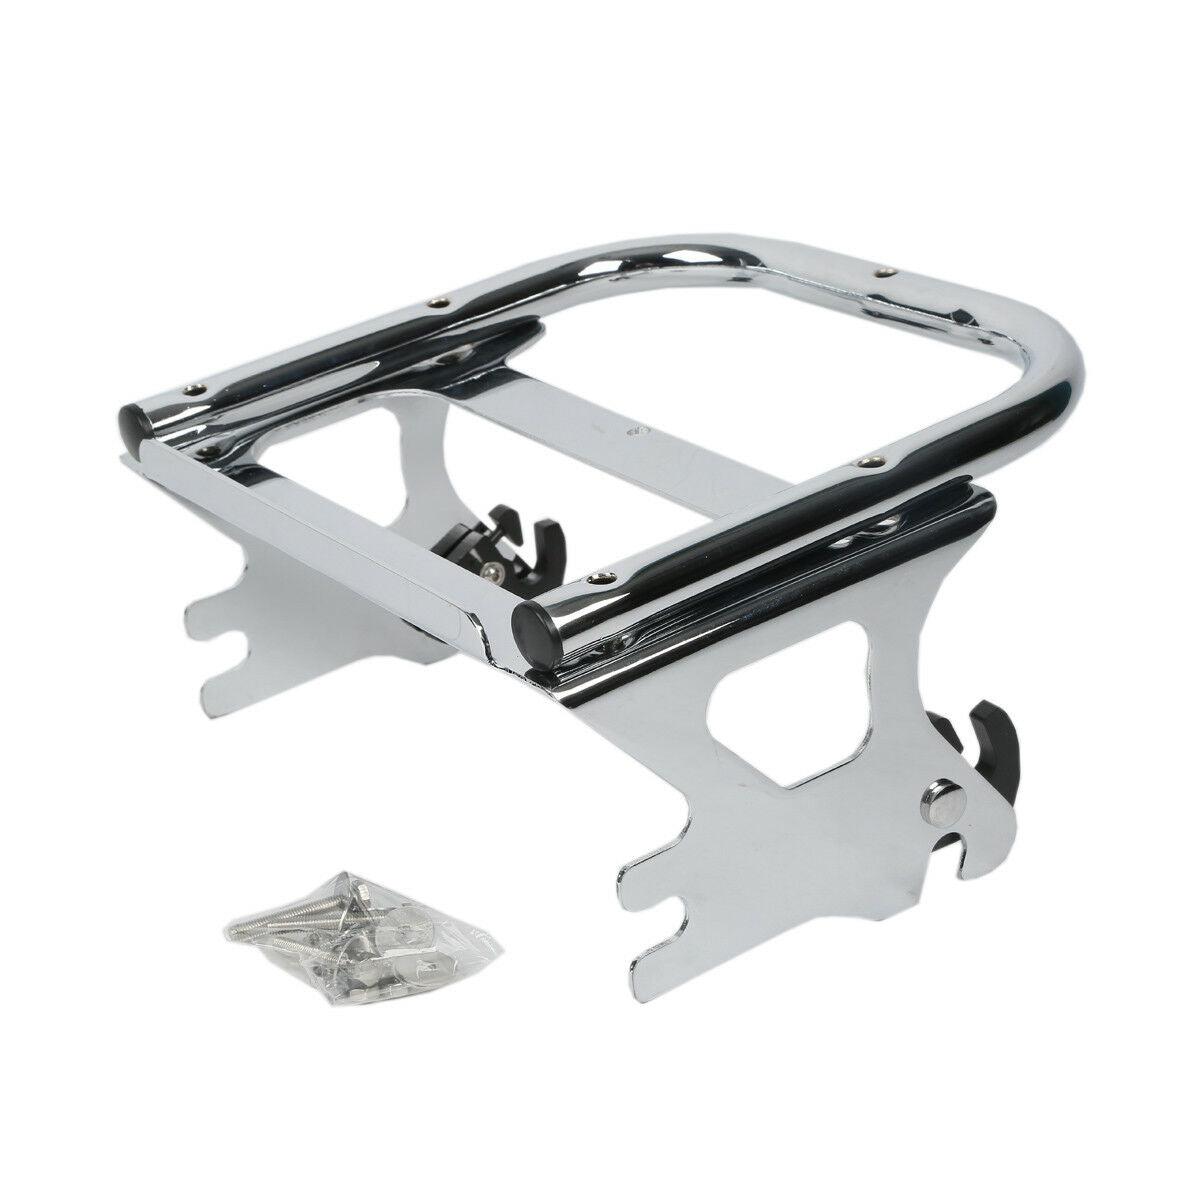 Detachable 2-up Trunk Pack Mount Luggage Rack Fit For Harley Road King 1997-2008 - Moto Life Products